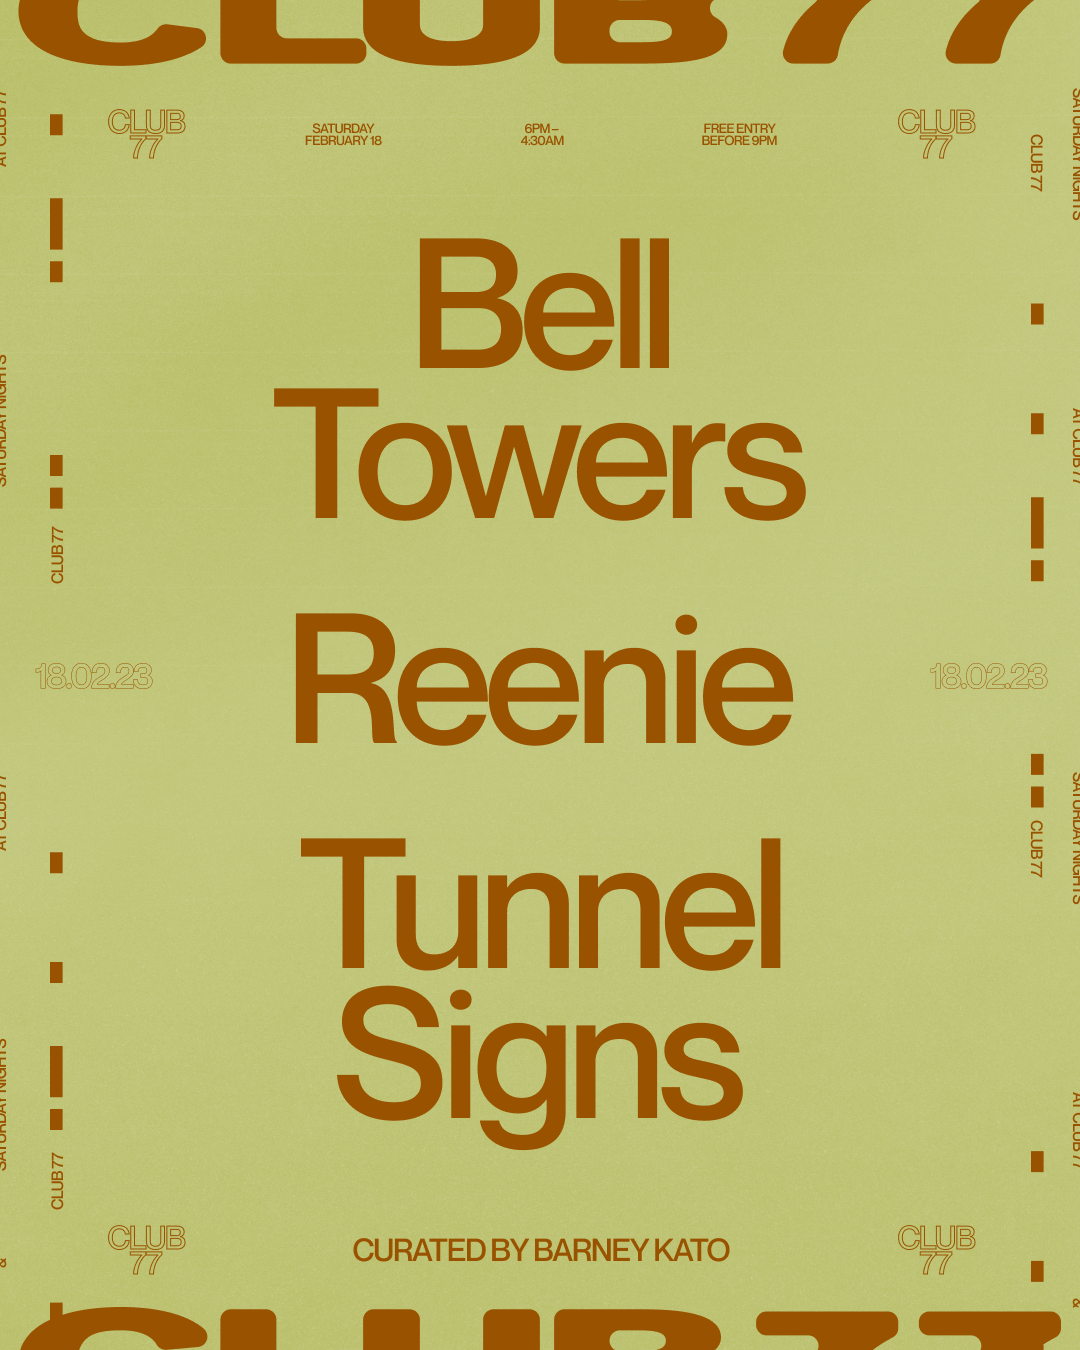 Club 77: Bell Towers, Reenie & Tunnel Signs - フライヤー表